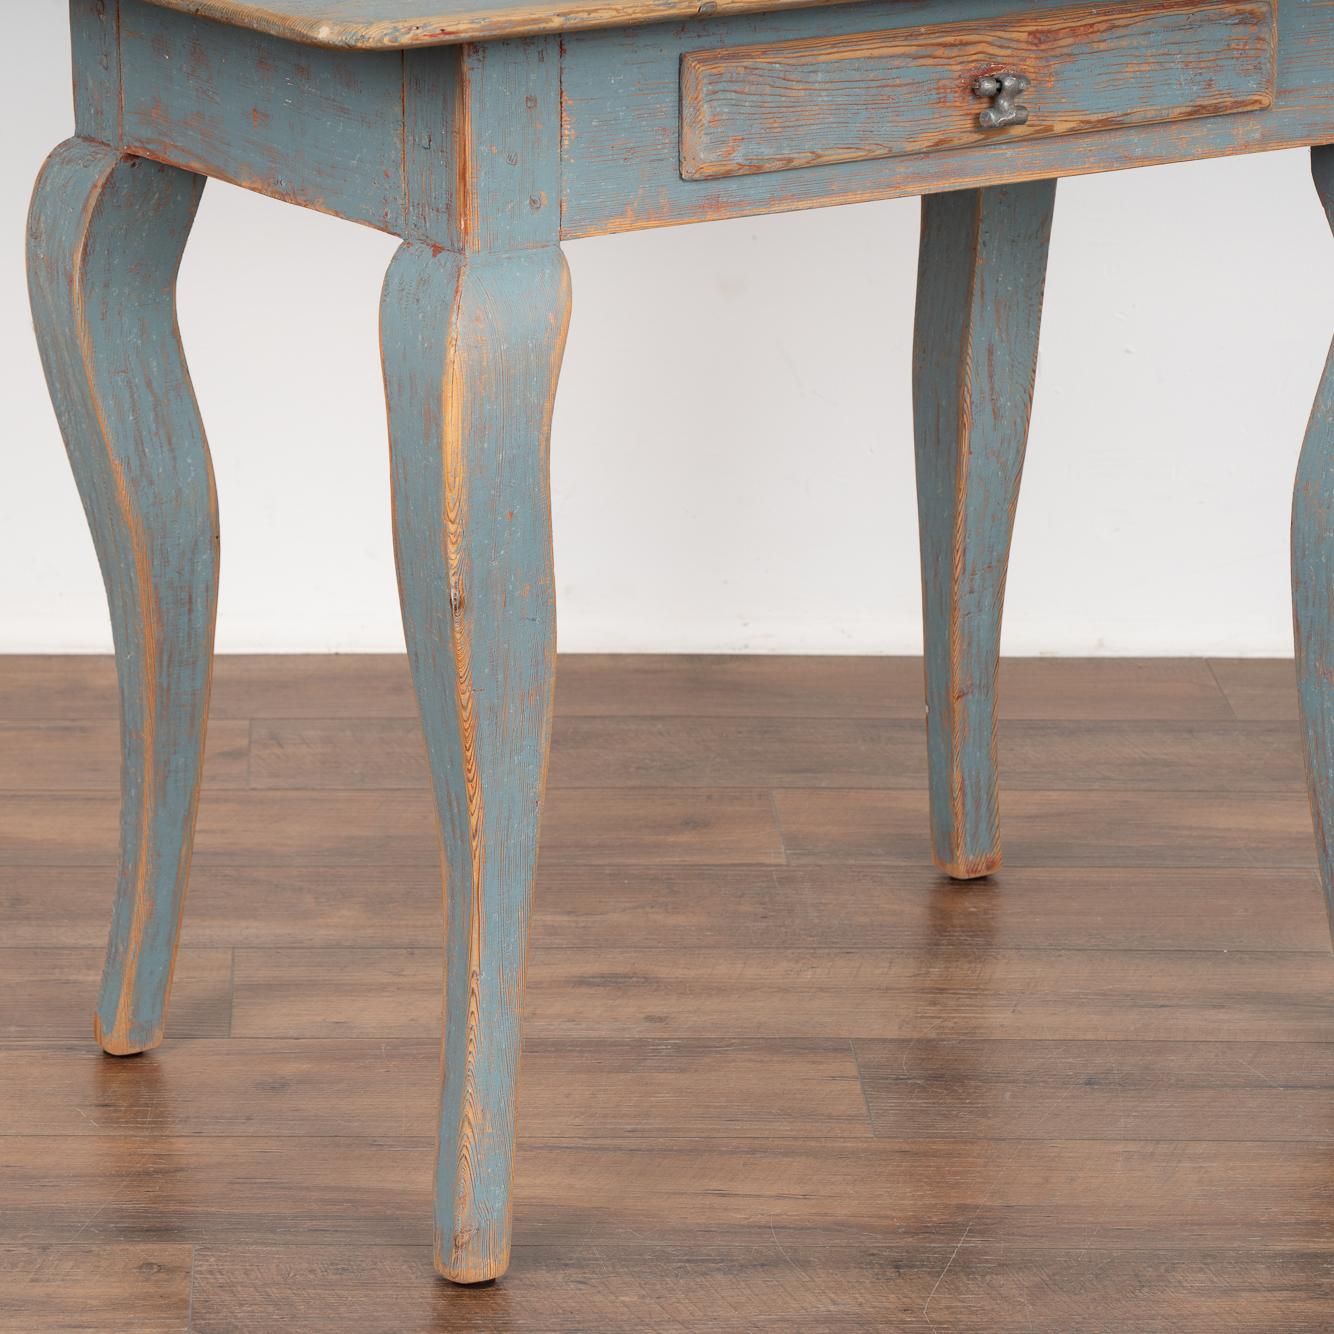 19th Century Blue Painted Pine Side Table With Cabriolet Legs, Sweden circa 1820-40 For Sale